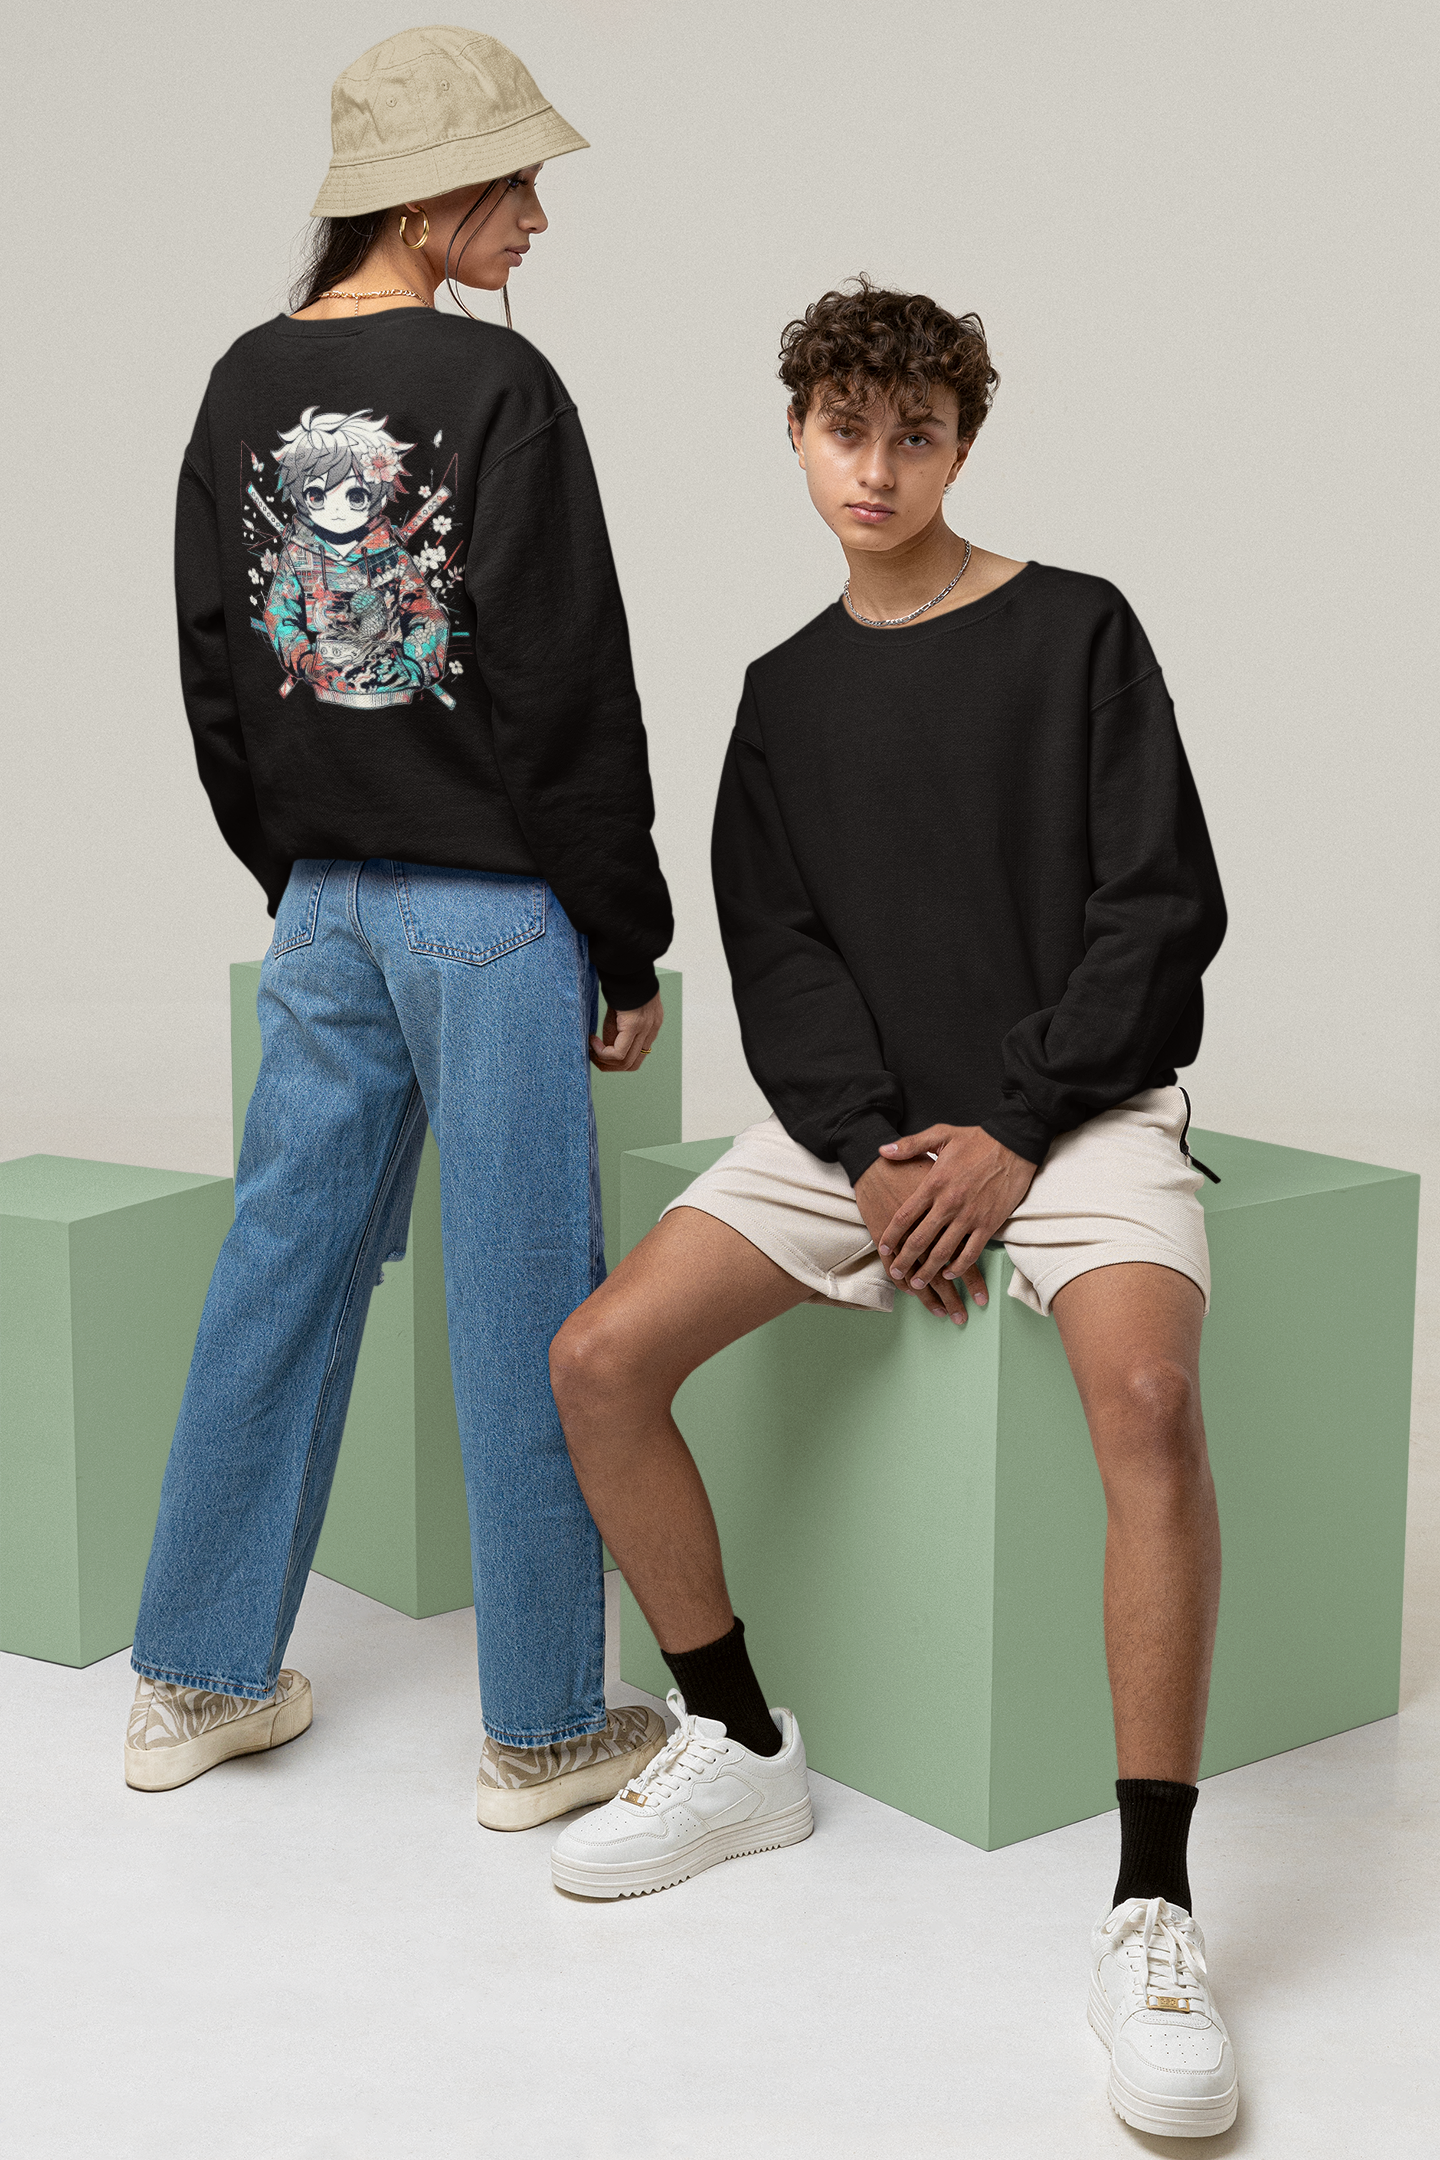 sweatshirt-mockup-of-a-serious-young-couple-posing-at-a-studio-m26202